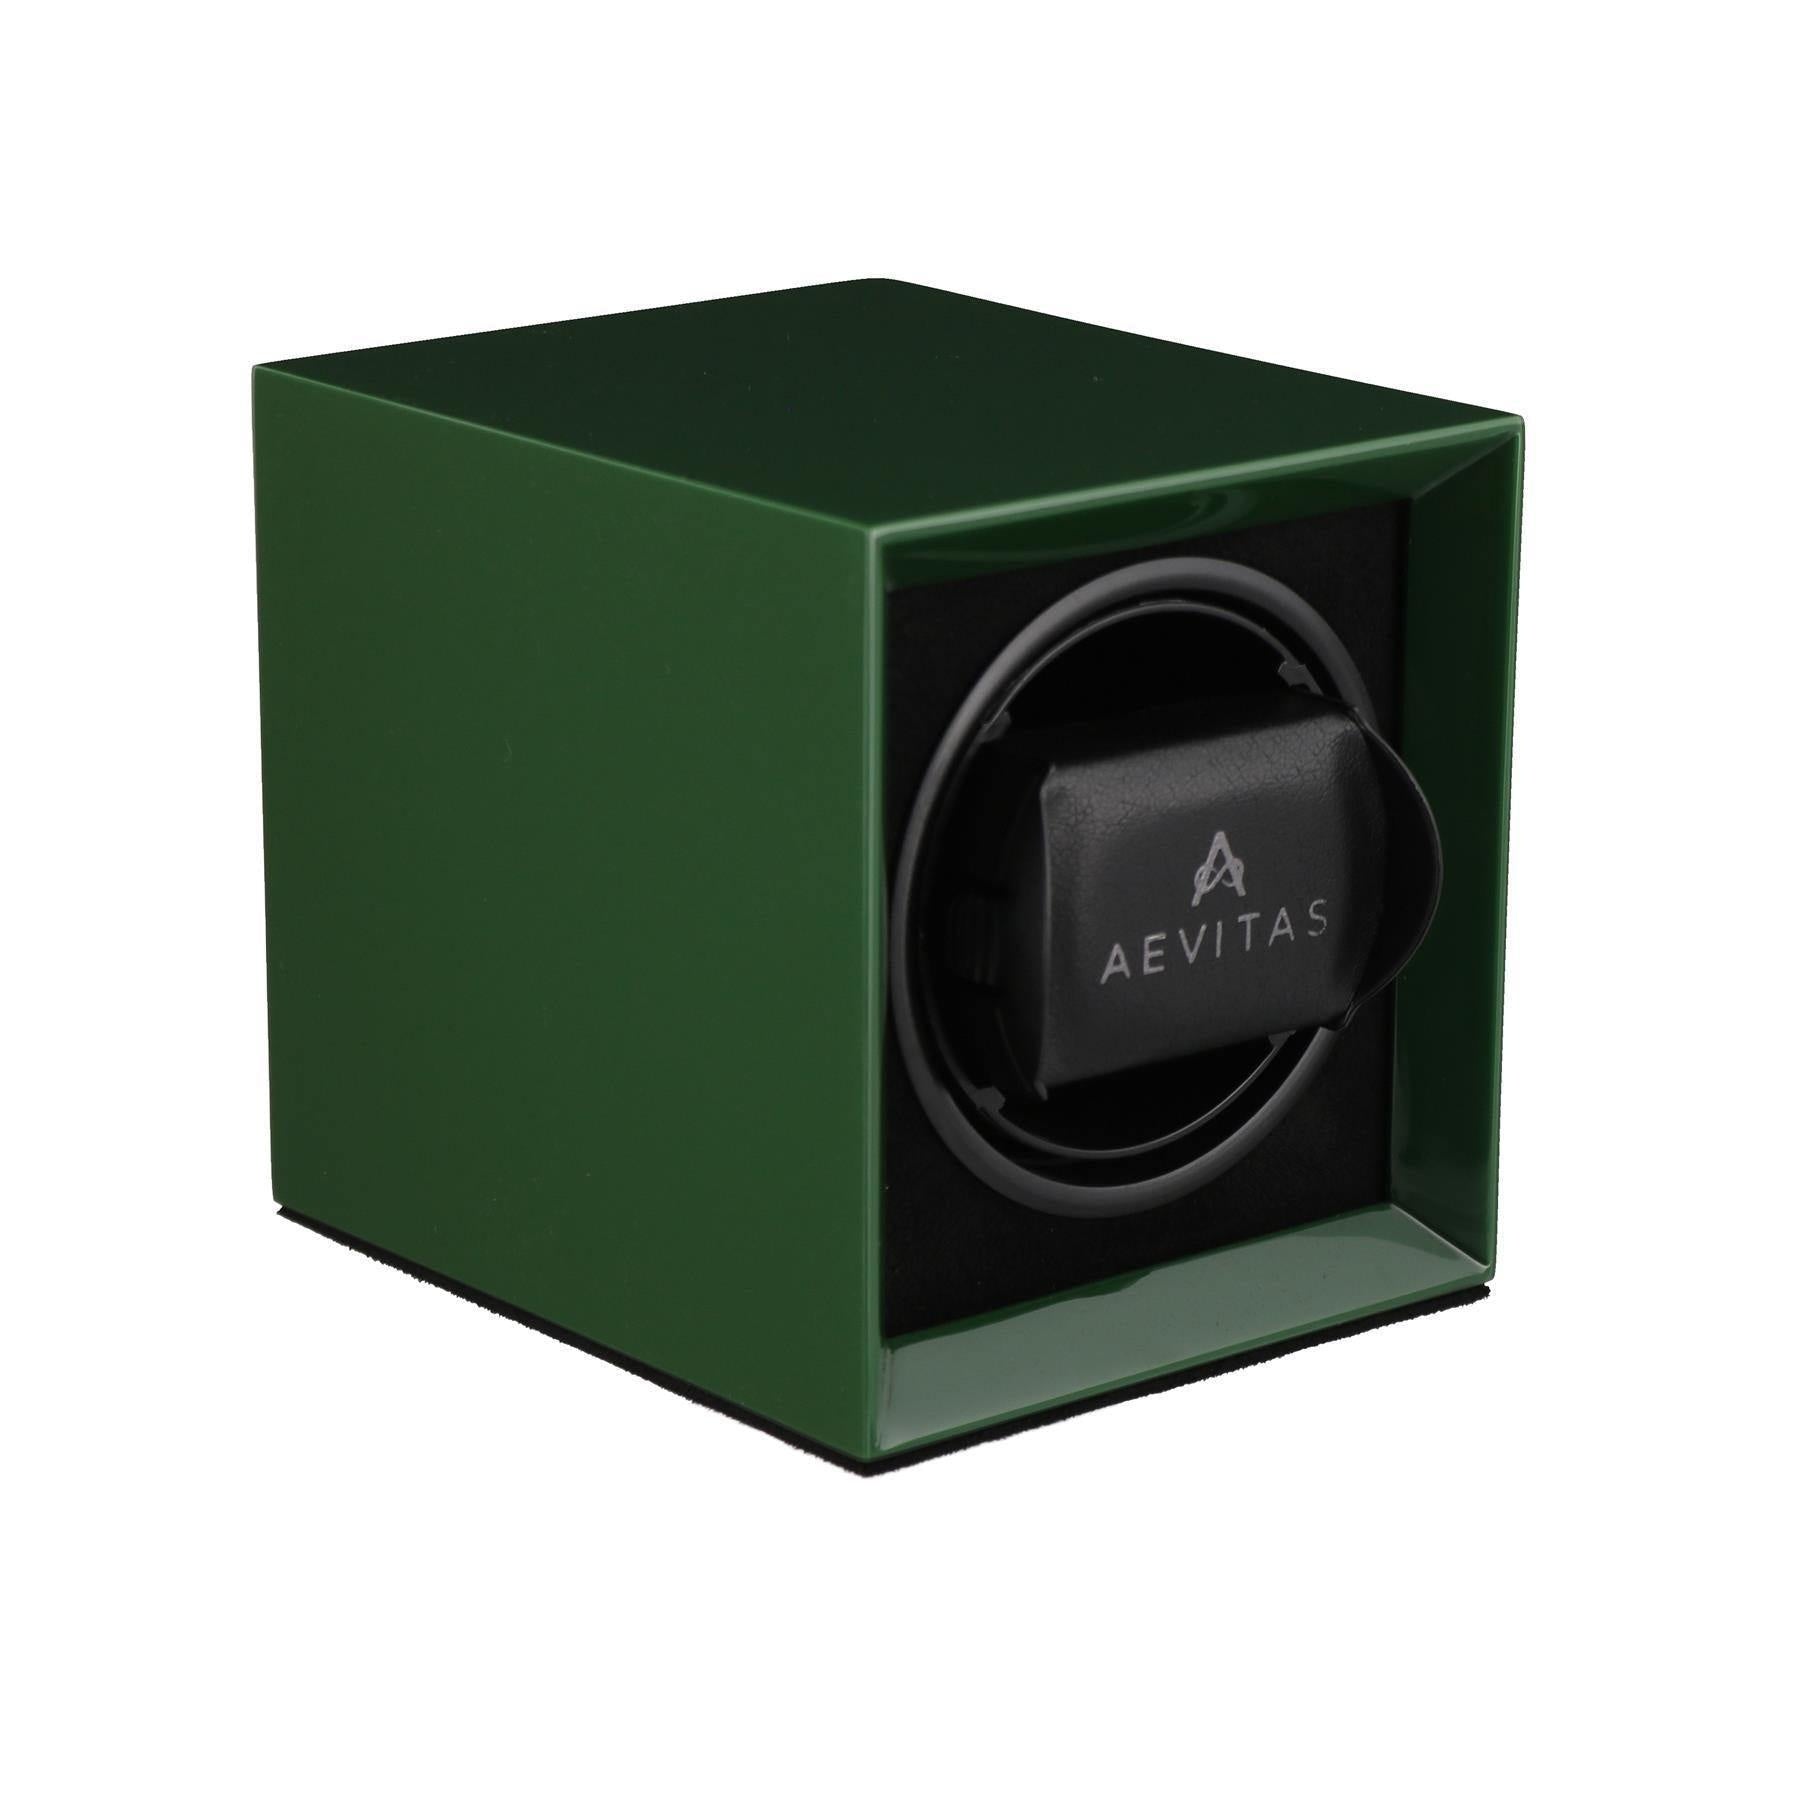 Watch Winder for 1 Automatic Watch in Green Mains or Battery by Aevitas